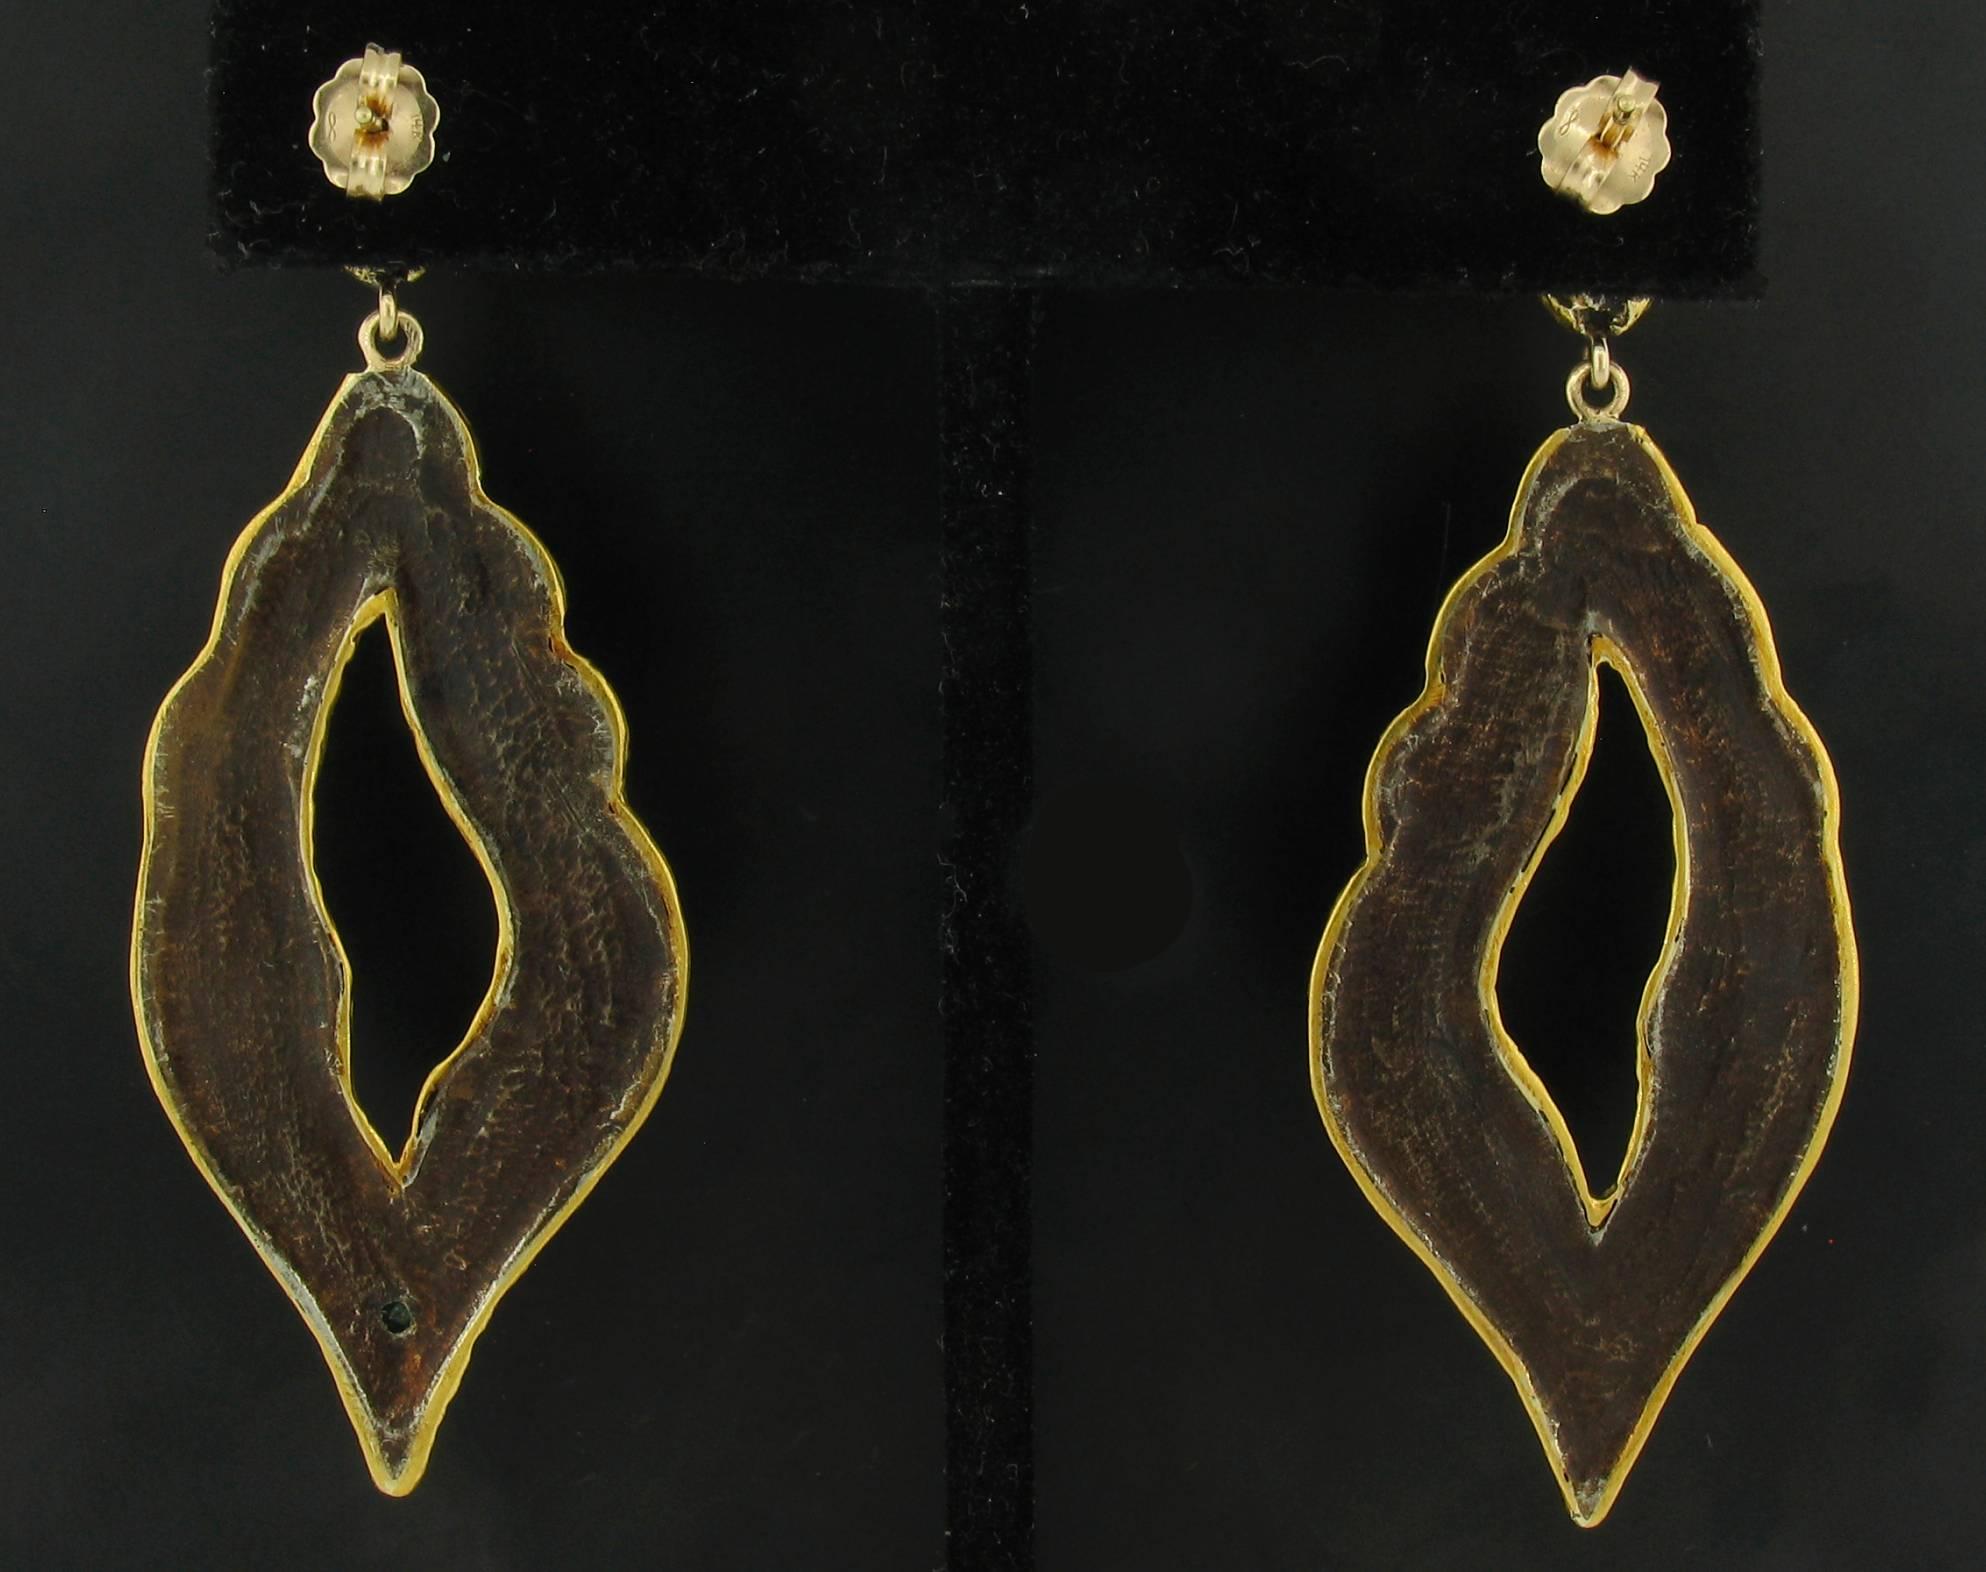 These Earrings were designed and made by well known designer Victor Velyan.   They contain 10 Beautiful Faceted Emeralds weighing 0.65 carats.  They are made of a base of pure Silver with all accent work created in 24k yellow Gold.  The 'brown' is a